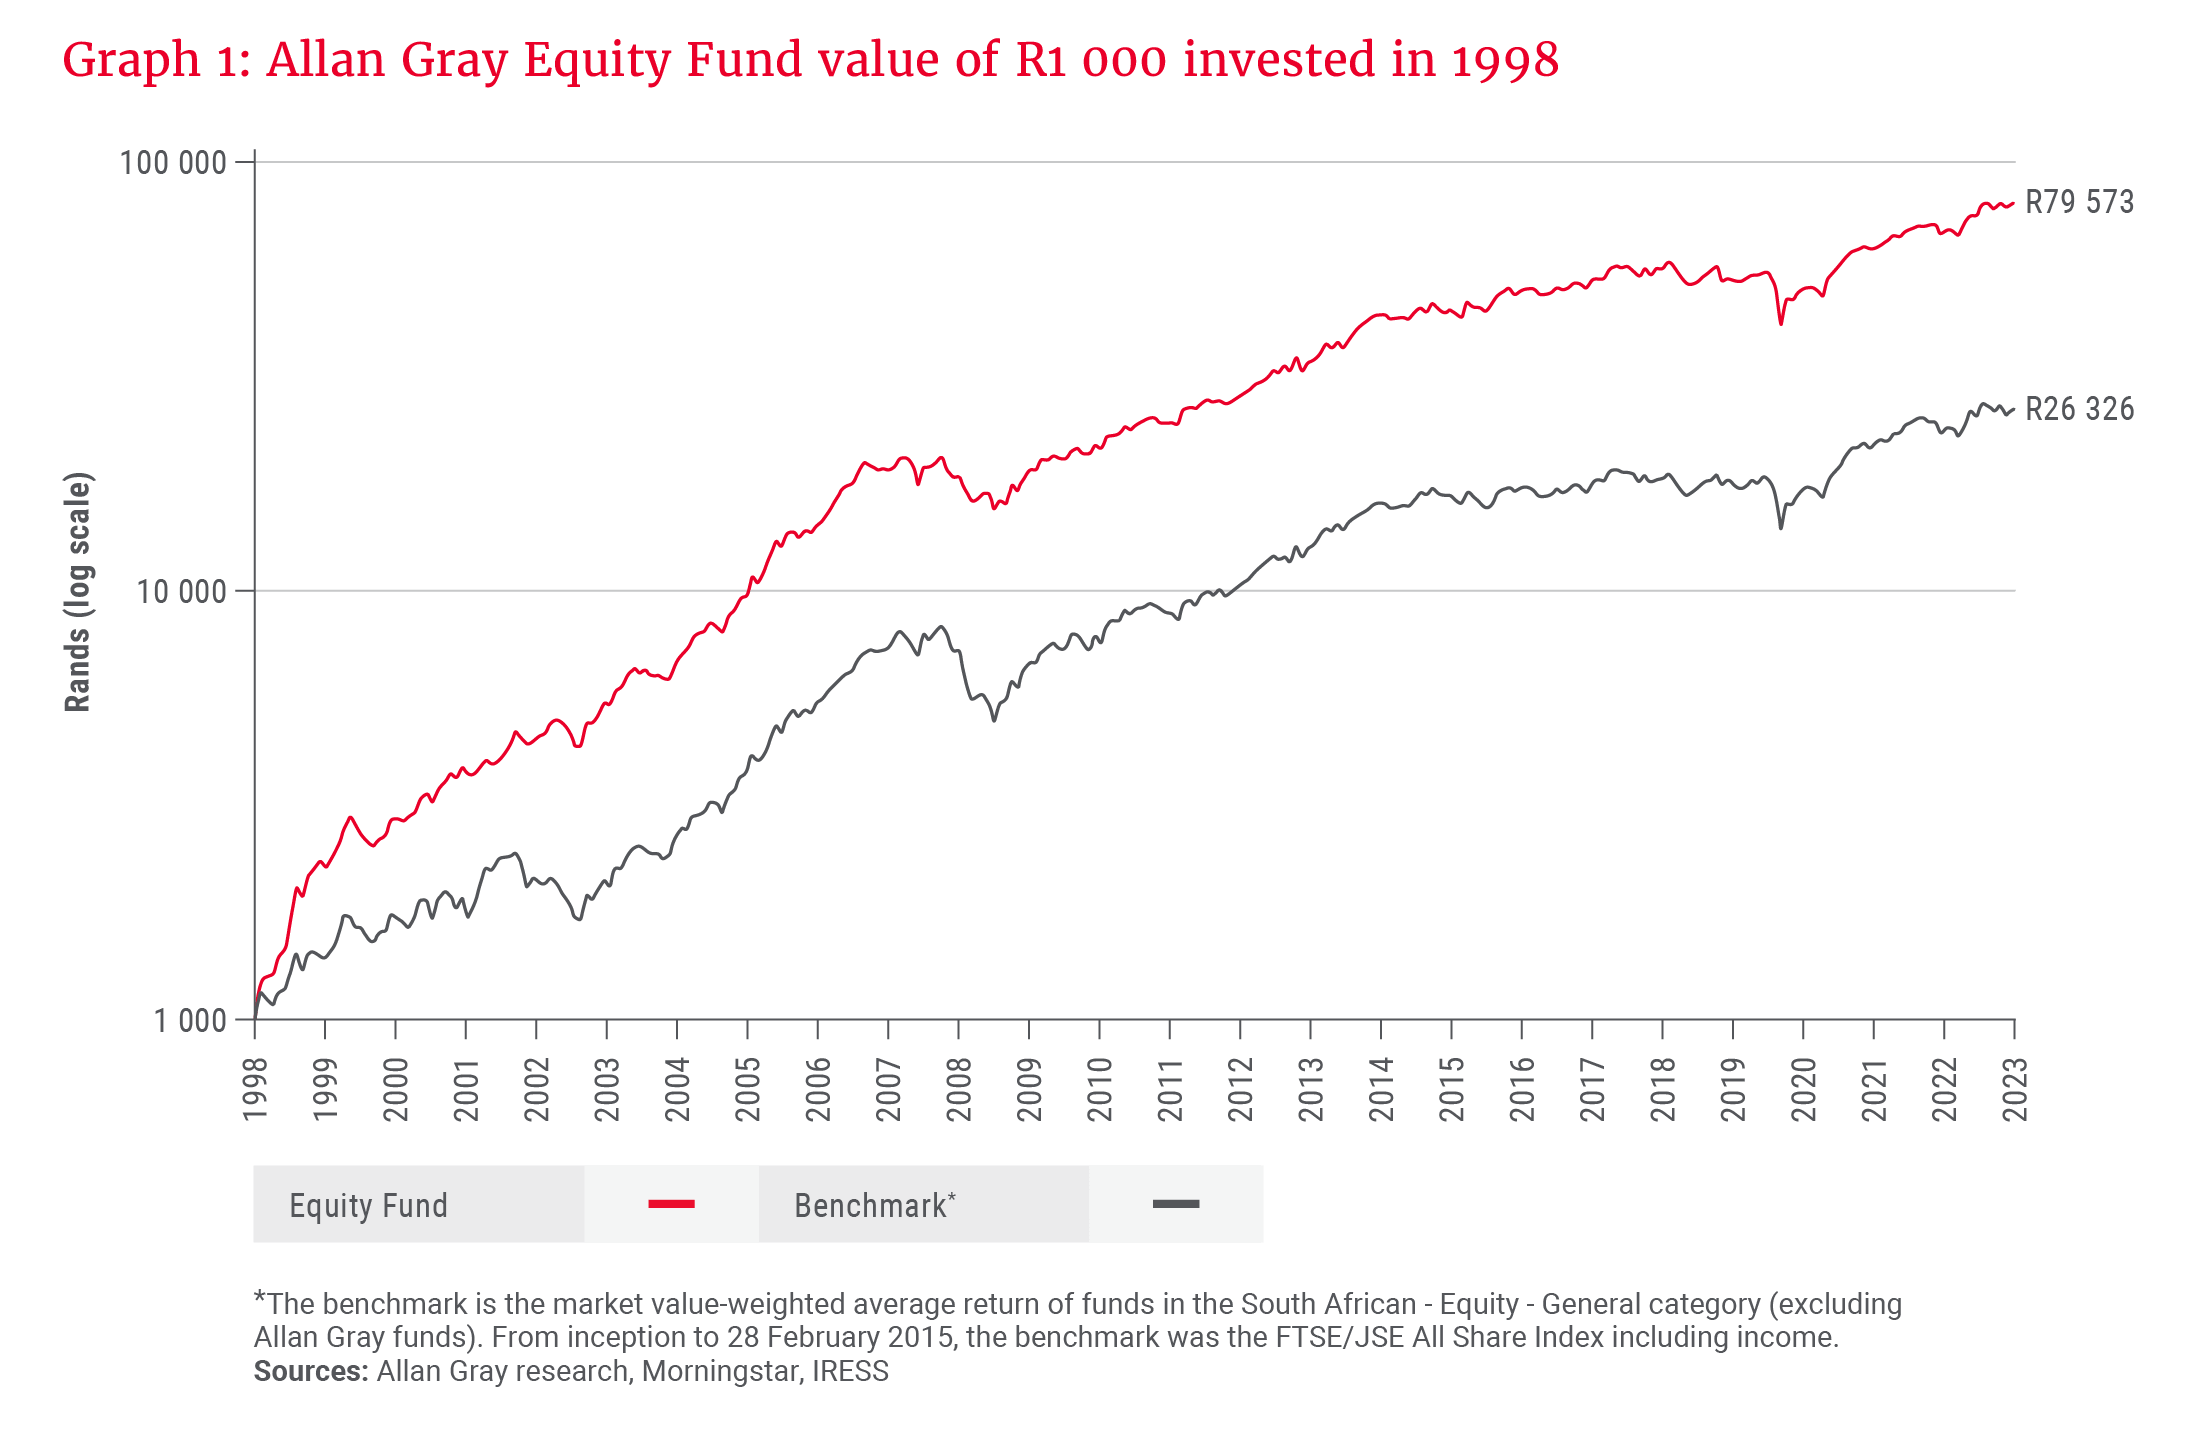 Allan Gray Equity Fund value of R1 000 invested in 1998